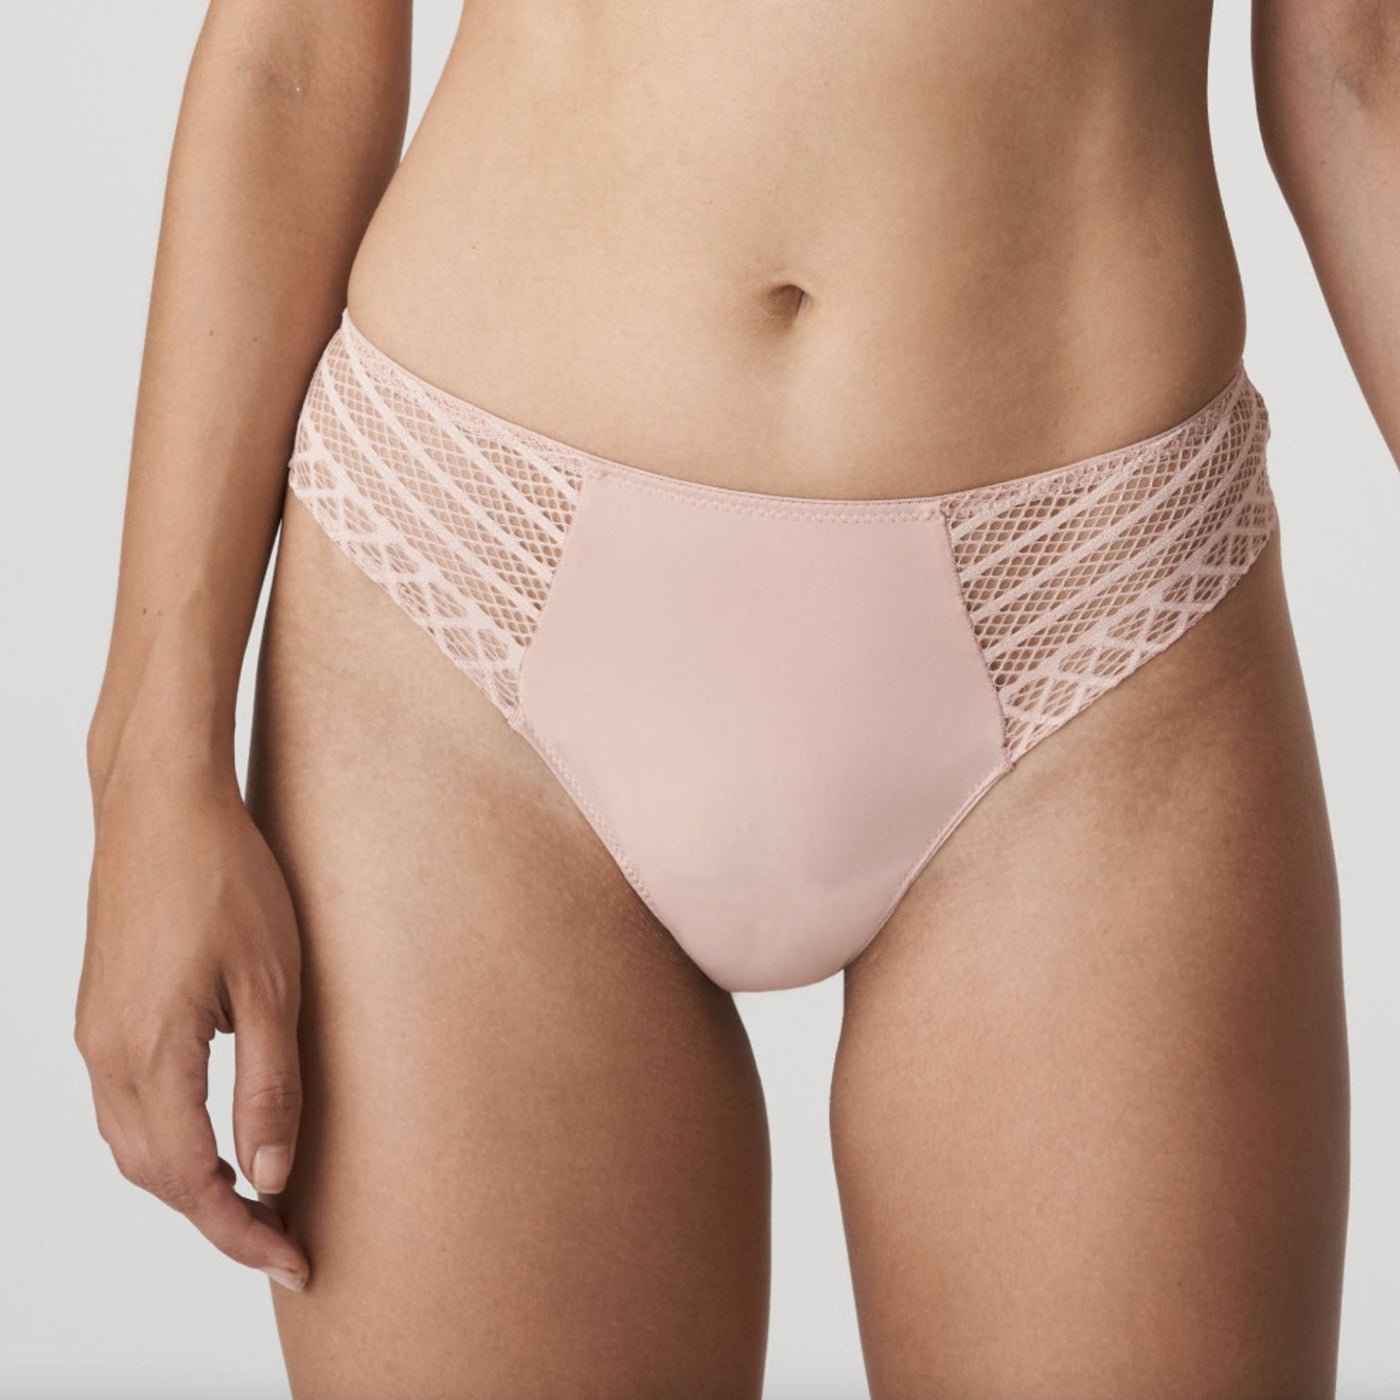 Prima Donna Twist East End Thong in Powder Rose 0641930-Panties-Prima Donna-Powder Rose-Small-Anna Bella Fine Lingerie, Reveal Your Most Gorgeous Self!